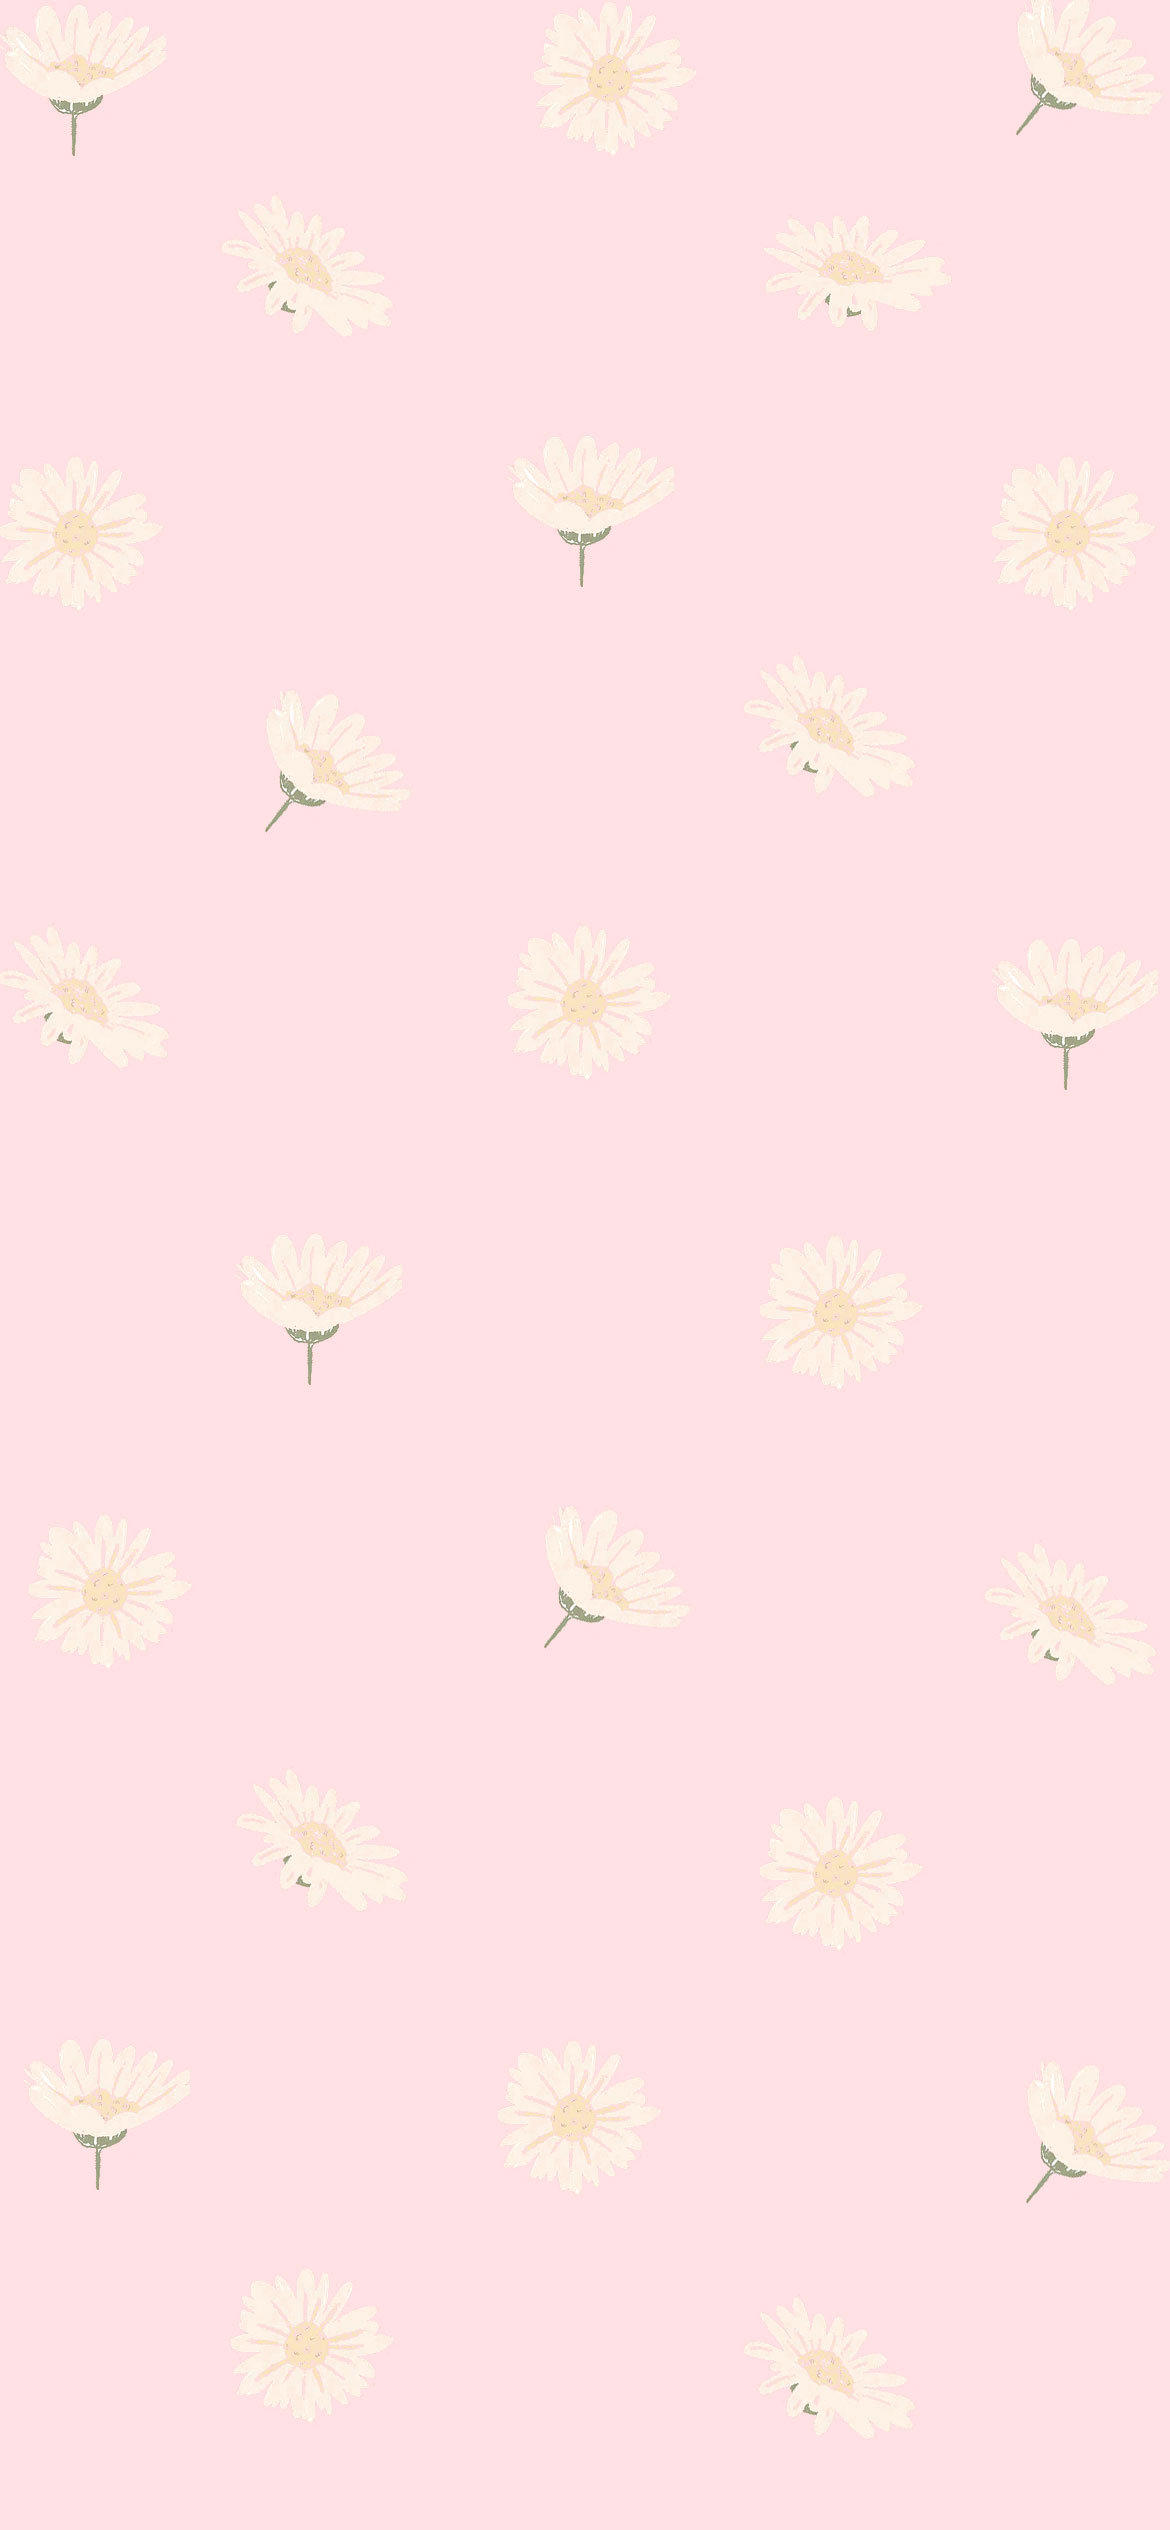 Pink Aesthetic Picture, Daisy on Pink Wallpaper